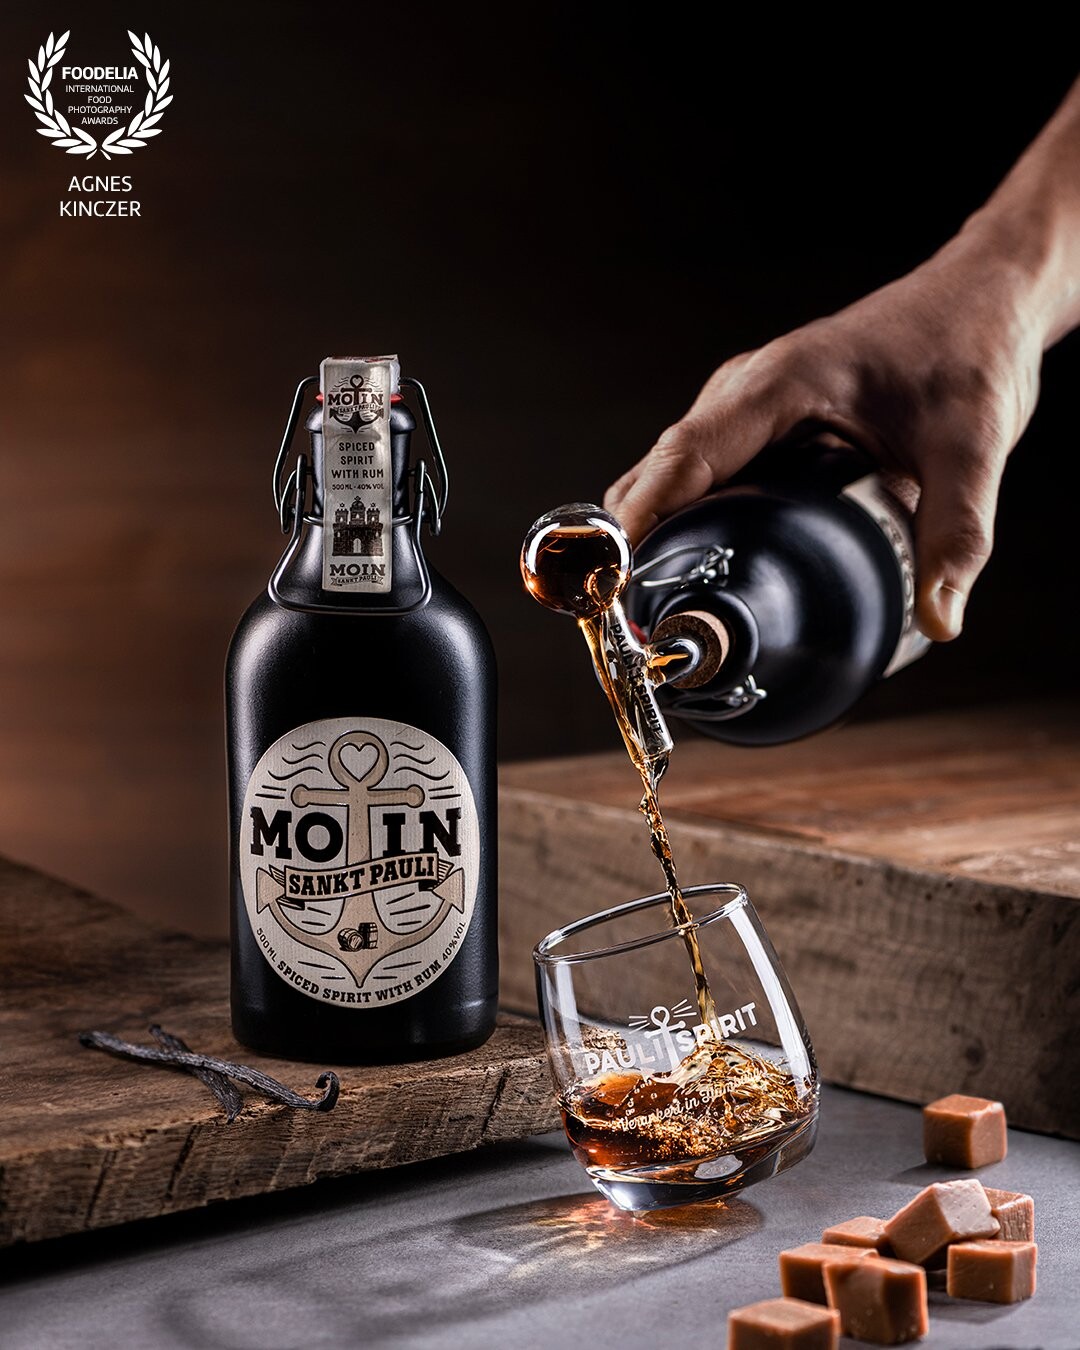 Based on a concept developed together with the client, the aim was to visualize the flavours of the drink, at the same time highlighting the product. A moody athmosphere was created which matches the rum, using the manufacturer's accessories. Part of an advertisement campaign.